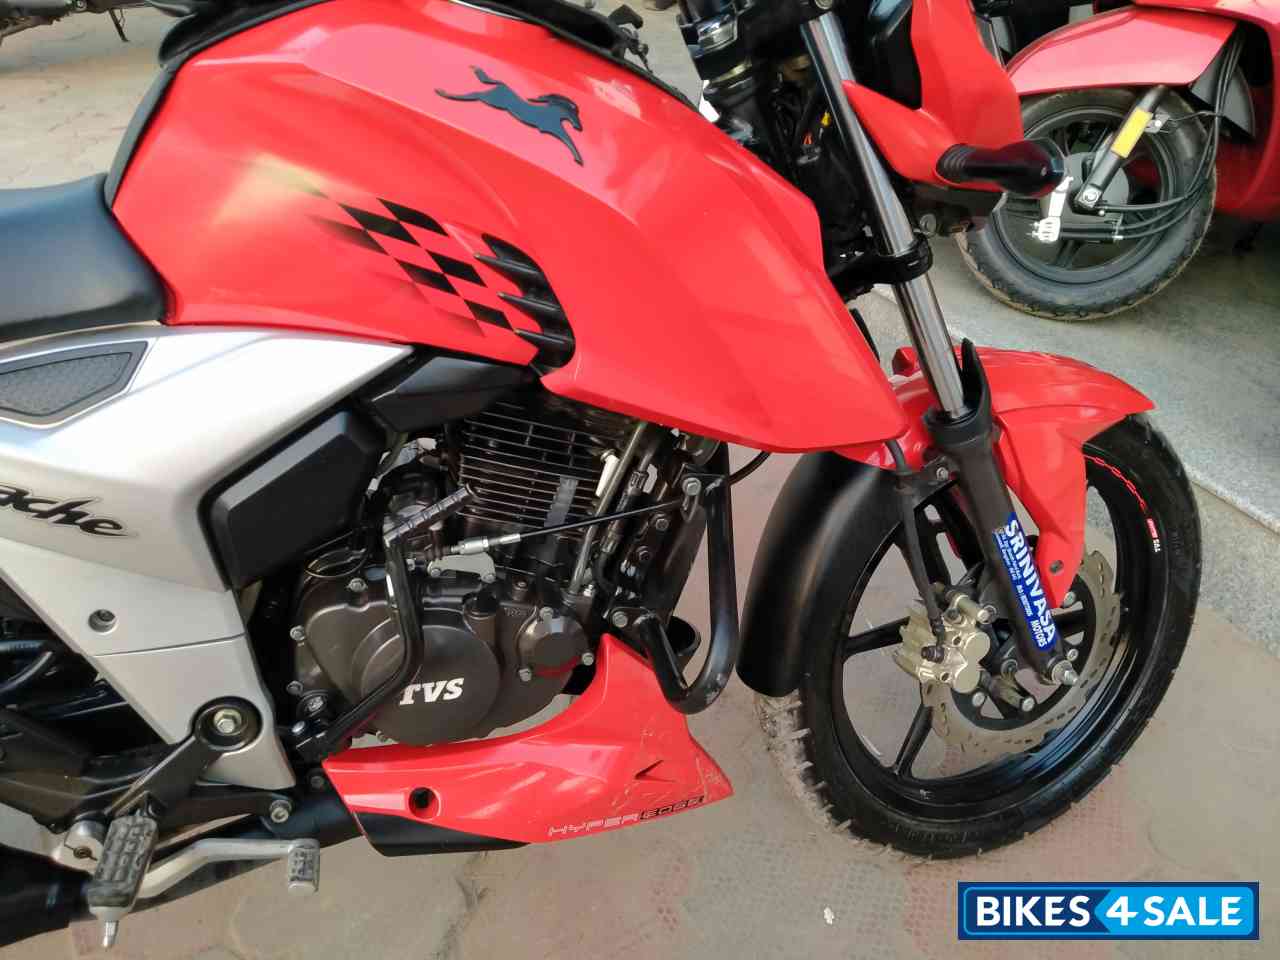 Used 19 Model Tvs Apache Rtr 160 4v For Sale In Bangalore Id Red Colour Bikes4sale